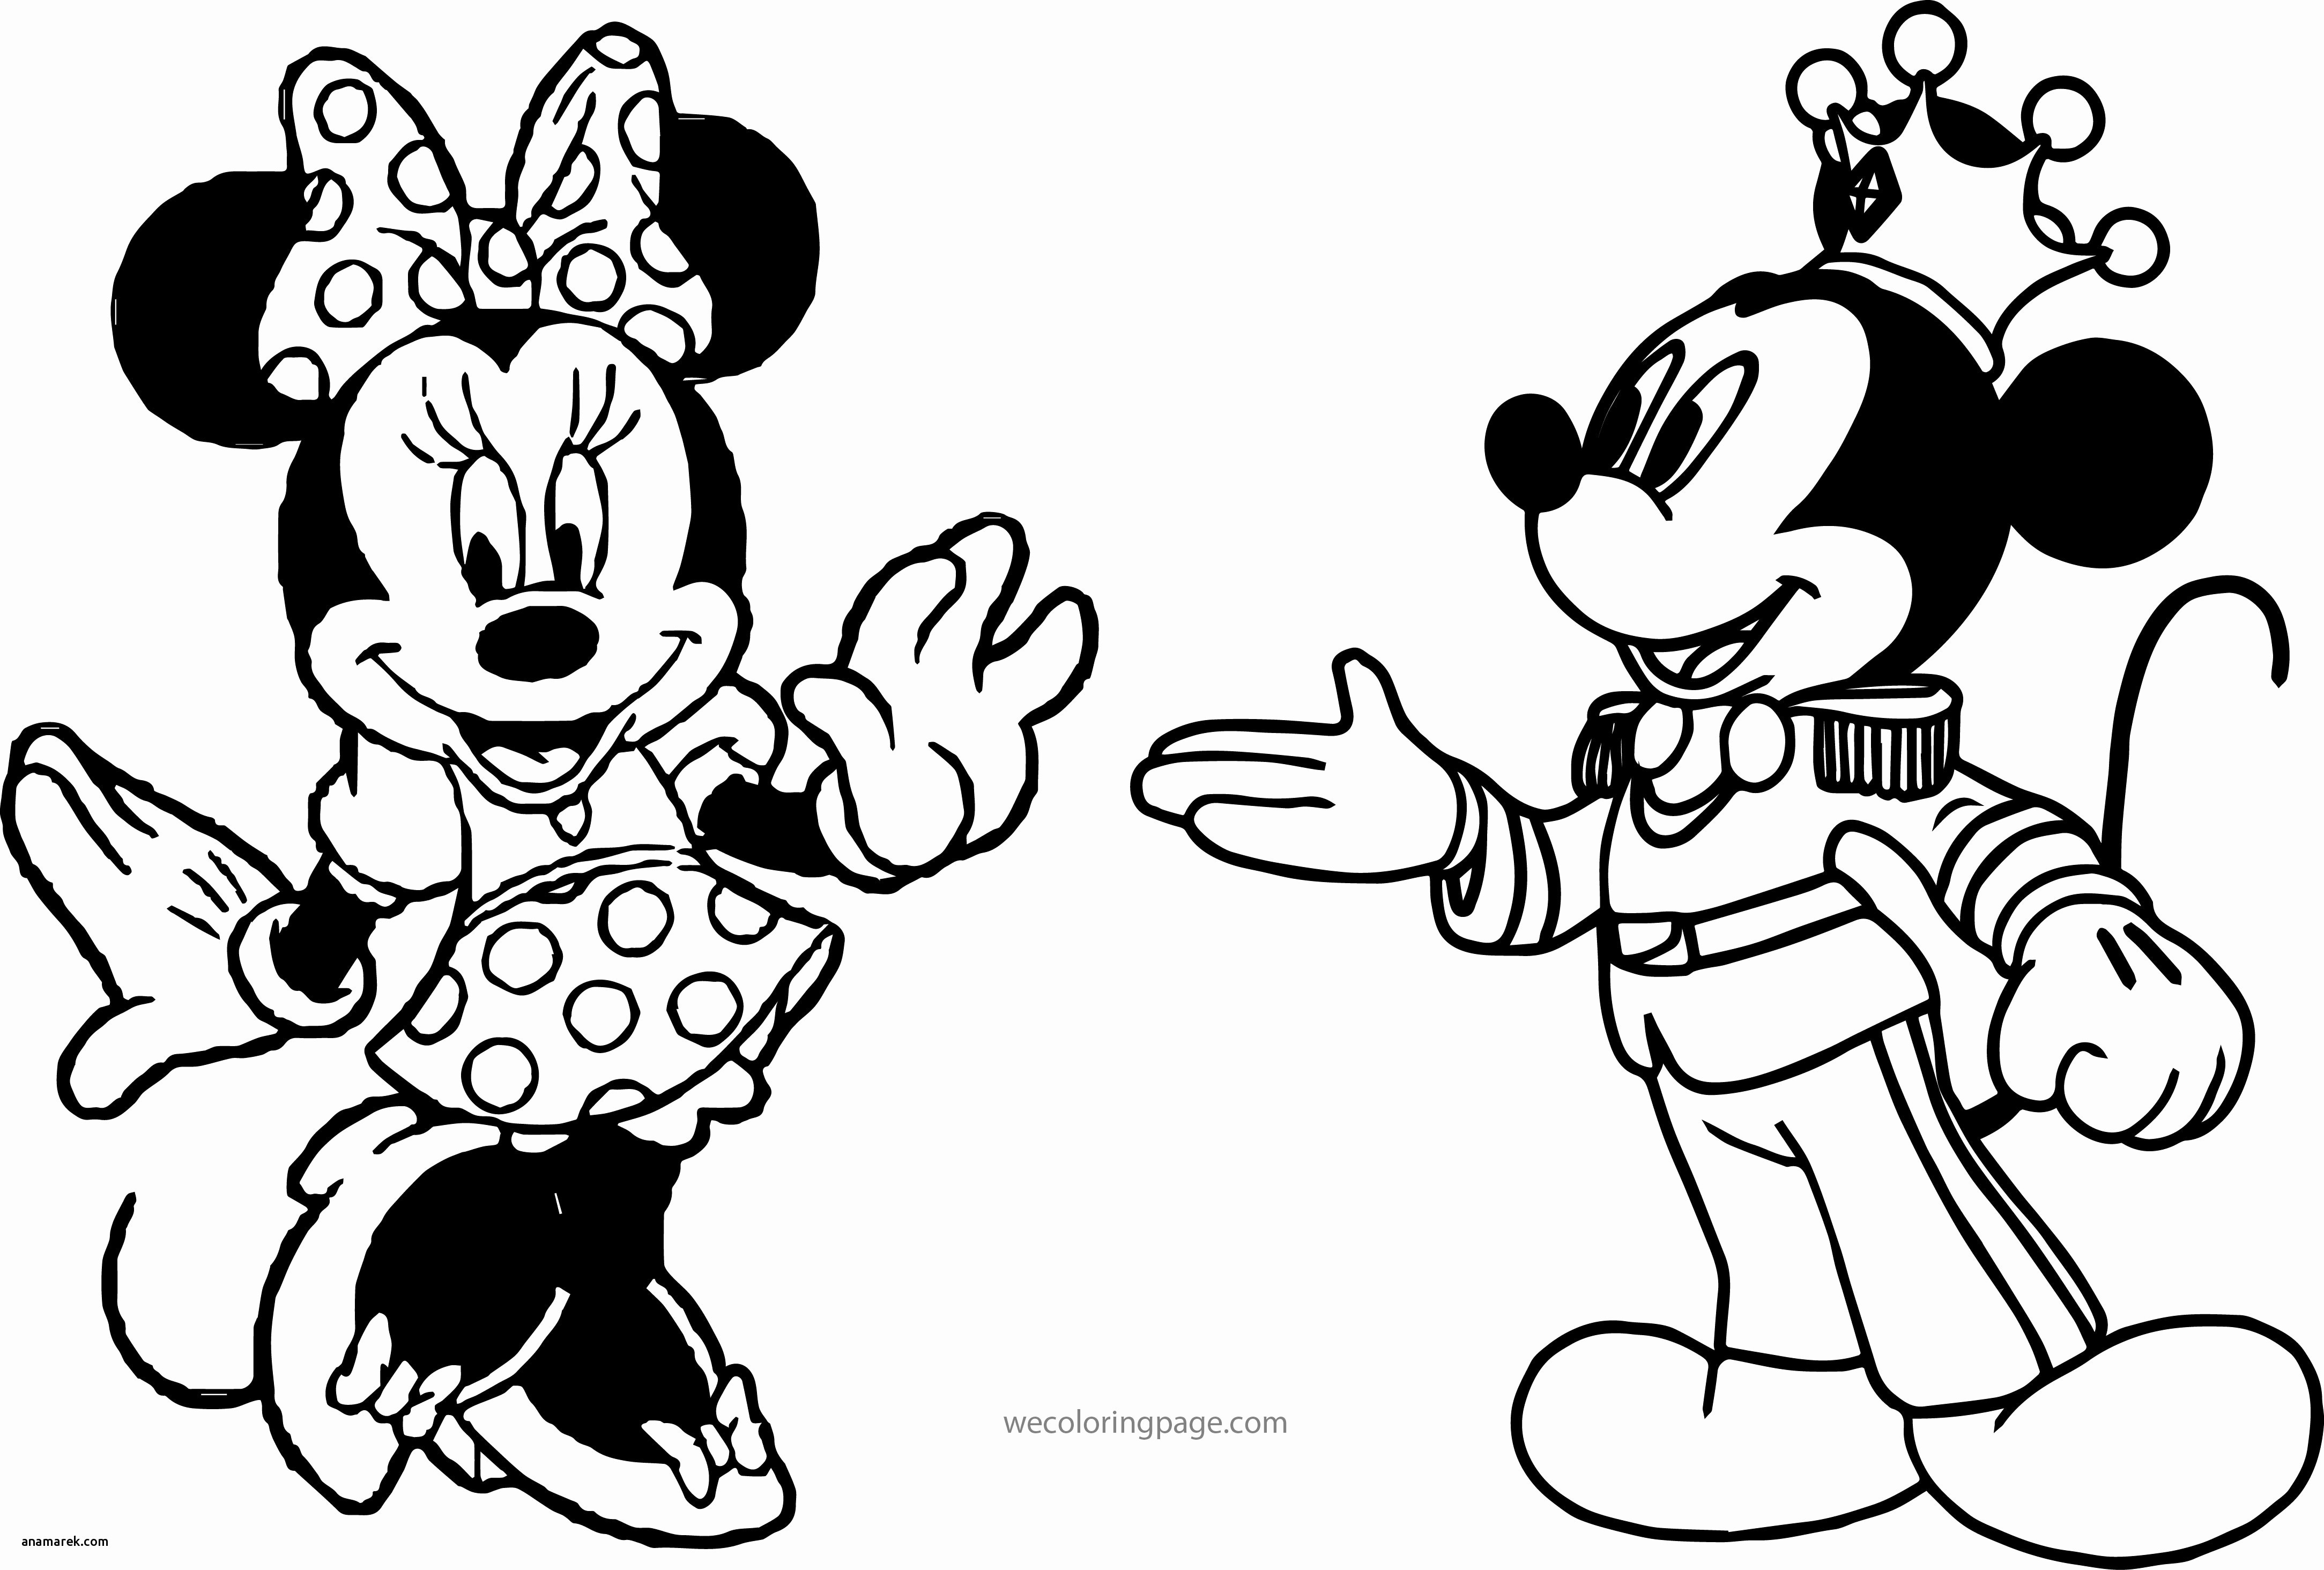 mickey mouse flower vase of mickey and minnie coloring pages best cool vases flower vase free with regard to mickey mouse color page awesome mickey and minnie mouse coloring of mickey and minnie coloring pages